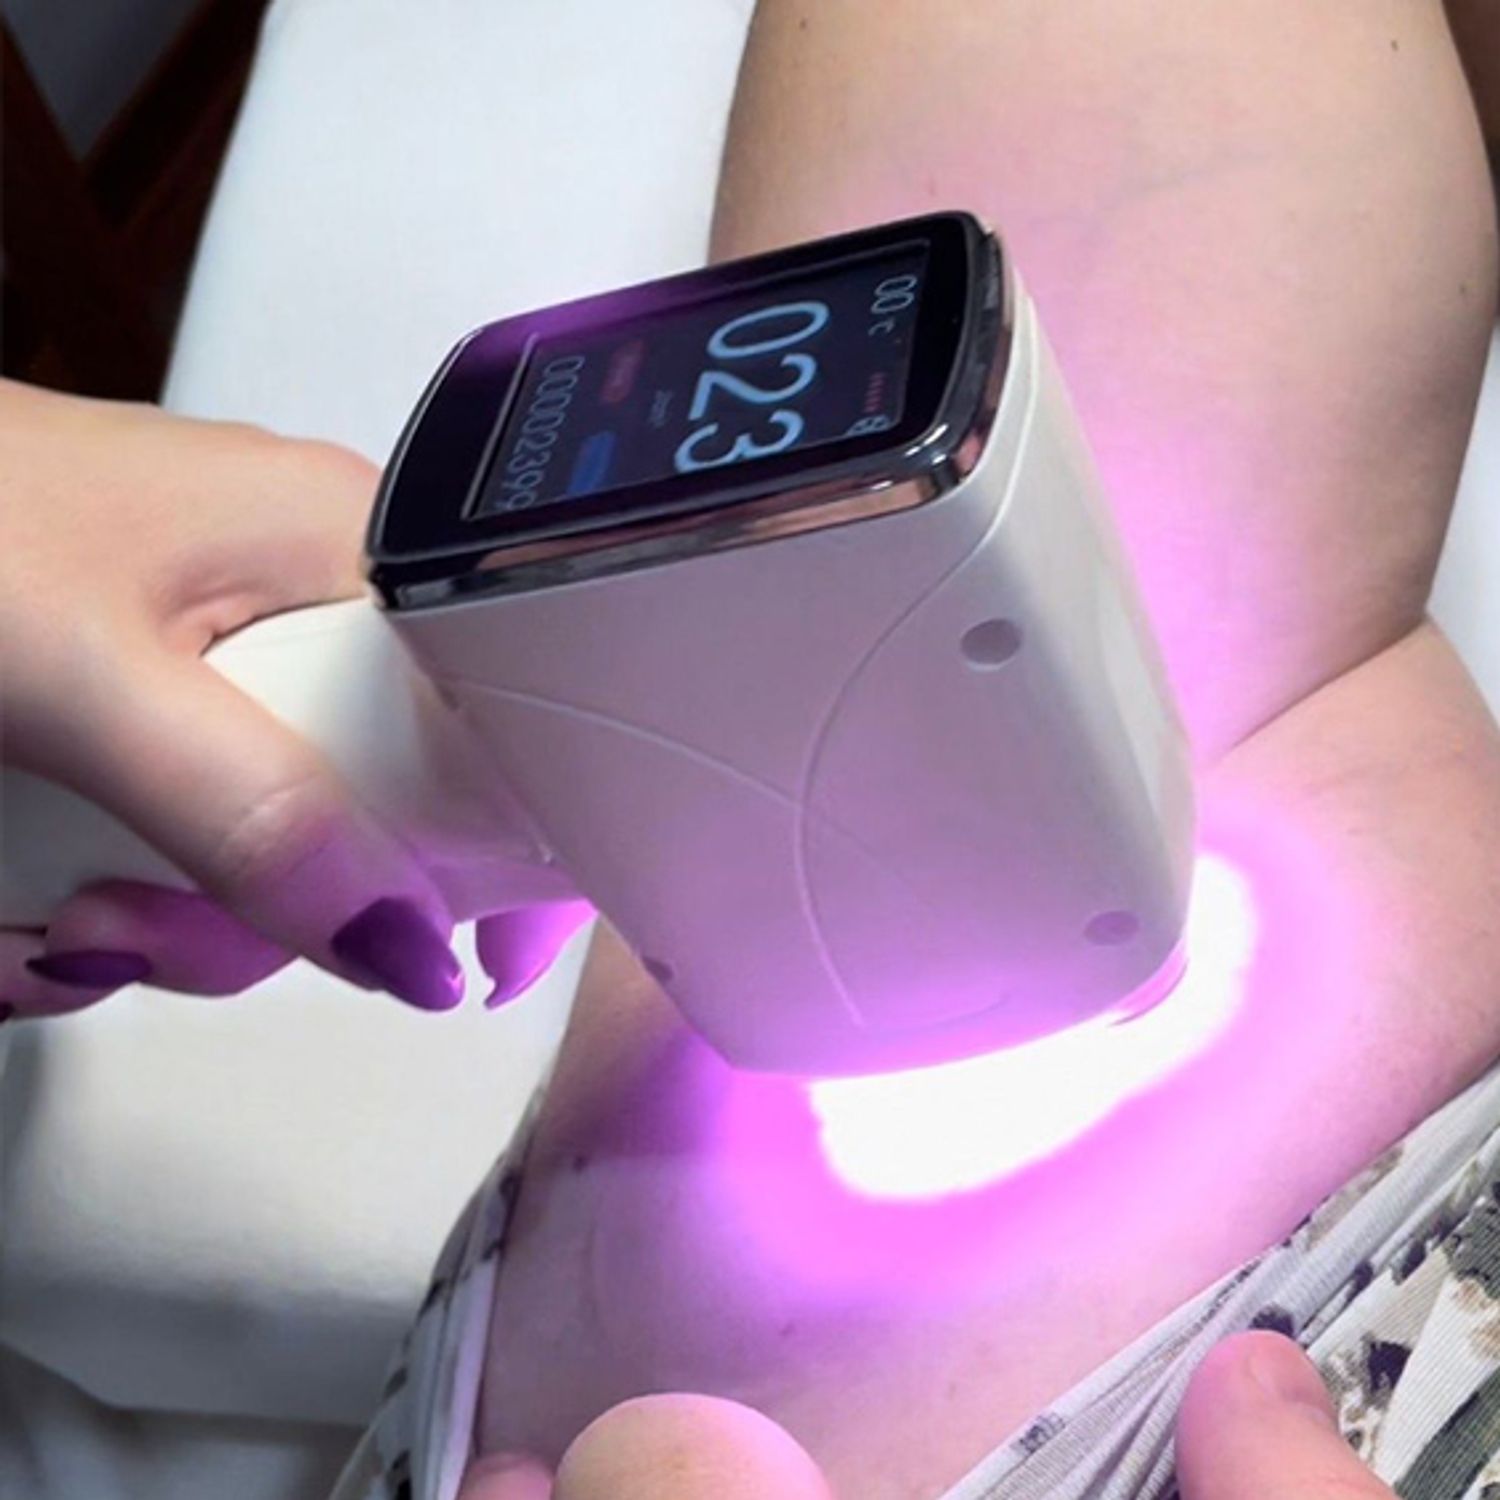 T5 Pro diode laser hair removal application